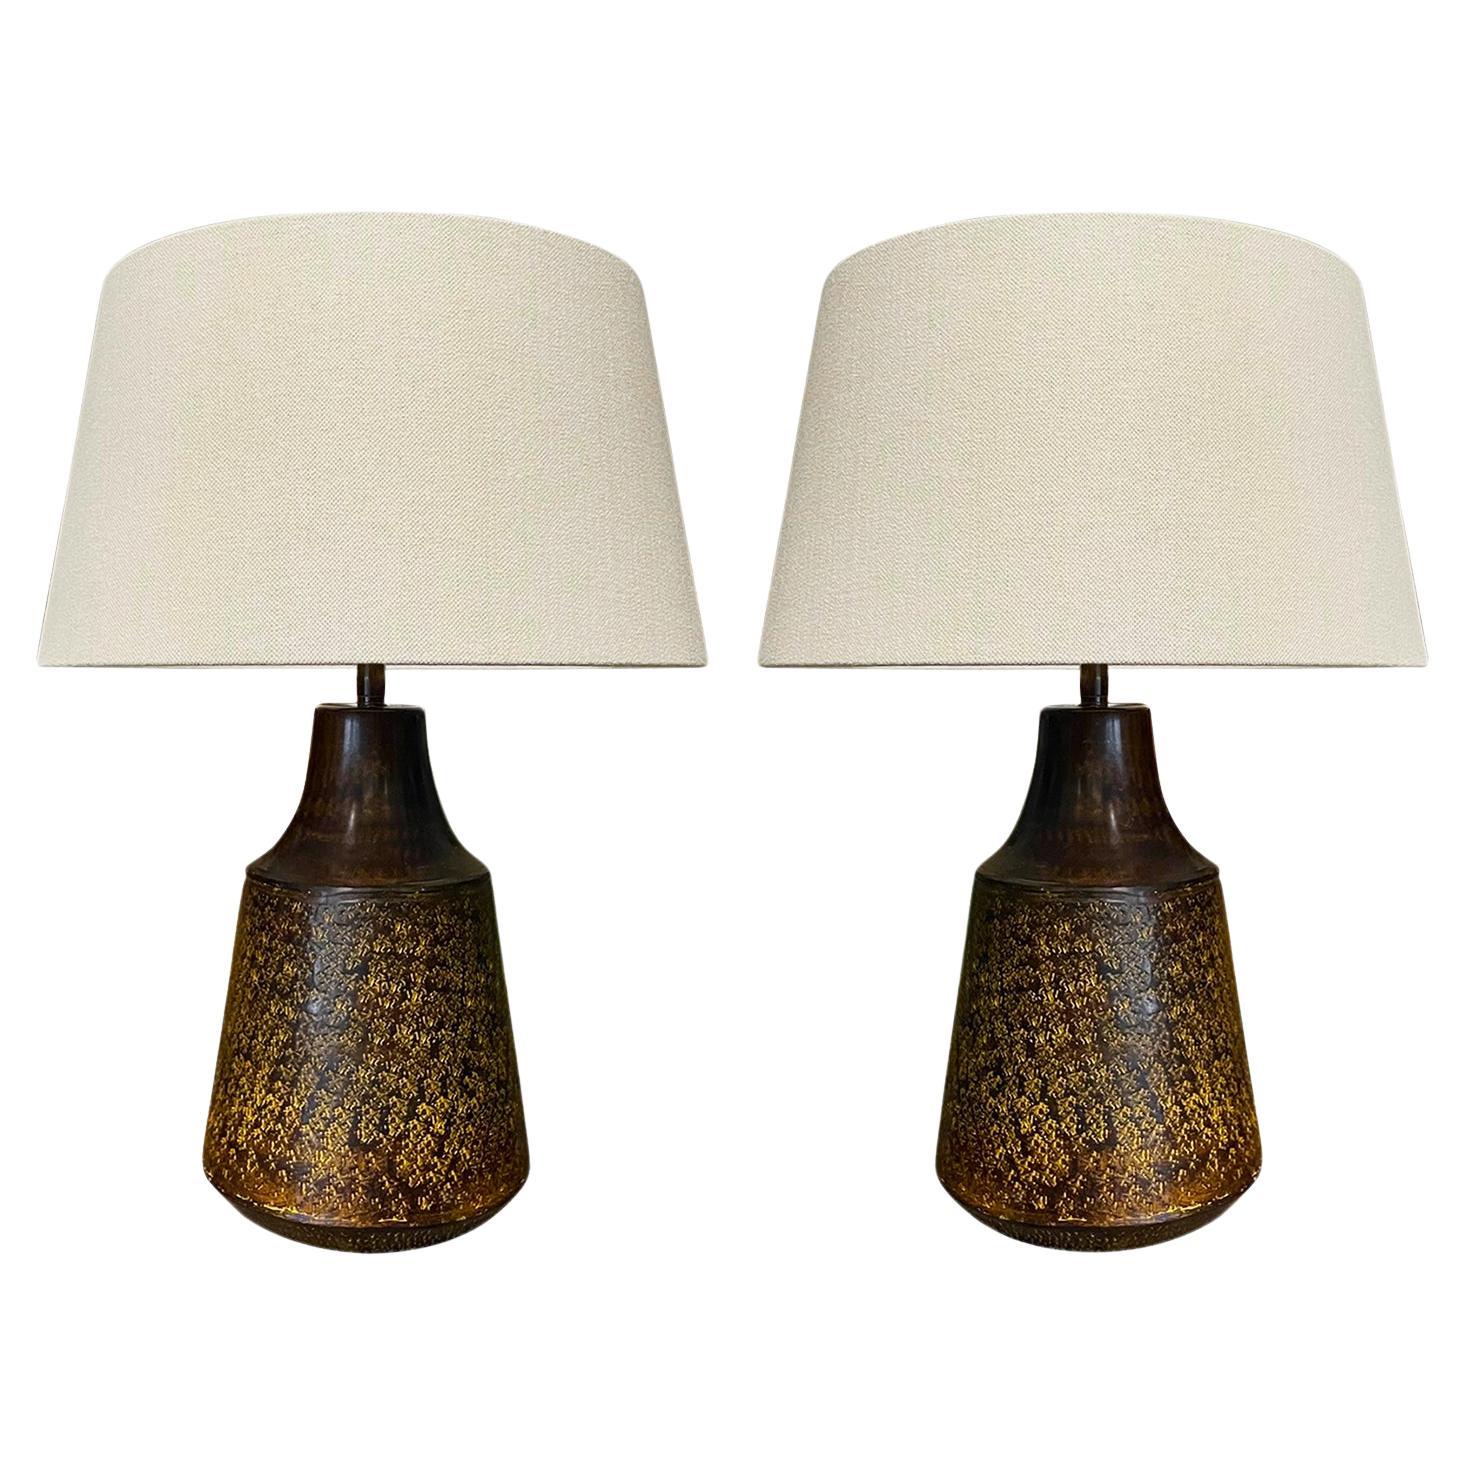 Gold And Brown Textured Metal Pair Table Lamps With Shades, Indonesia